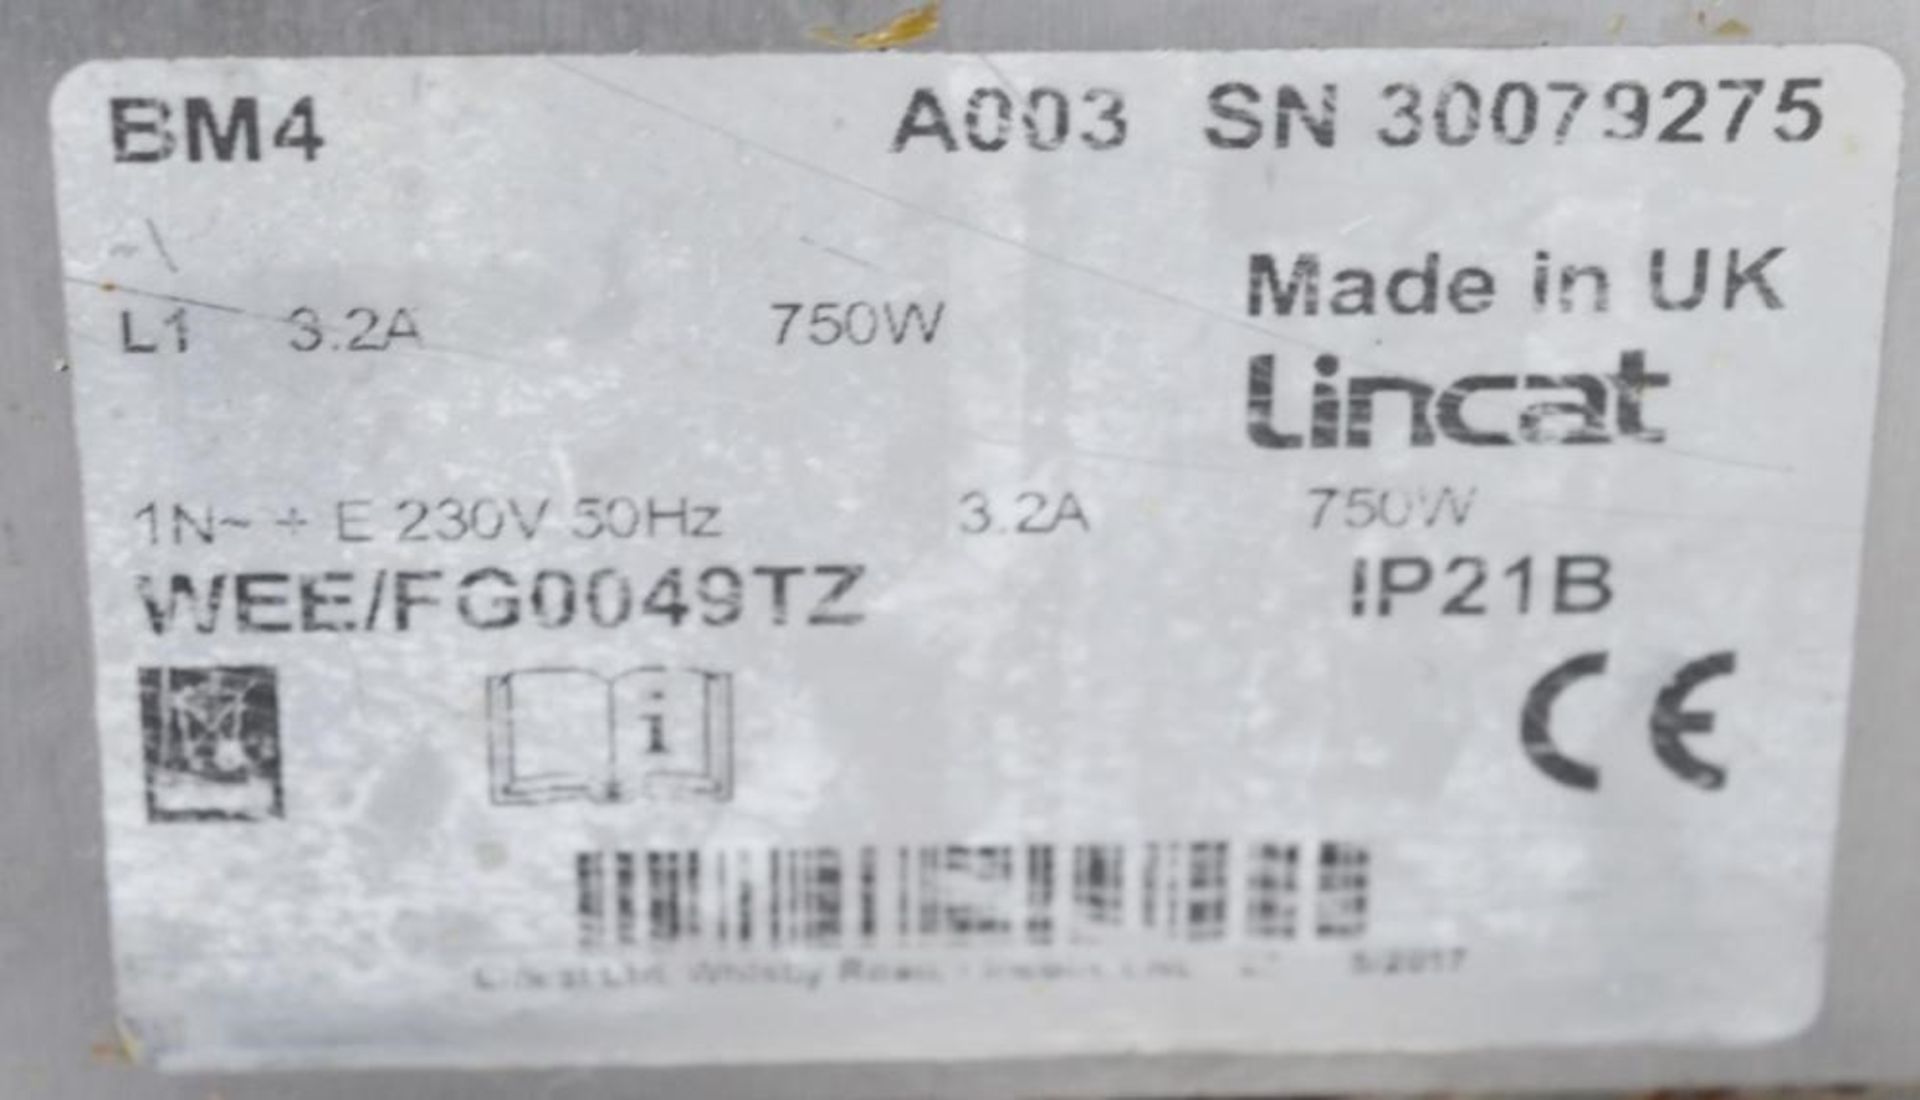 1 x LINCAT Commercial Bain Marie (BM4) - Made In UK - Stainless Steel Finish - Ref: IT548 - CL232 - - Image 9 of 9